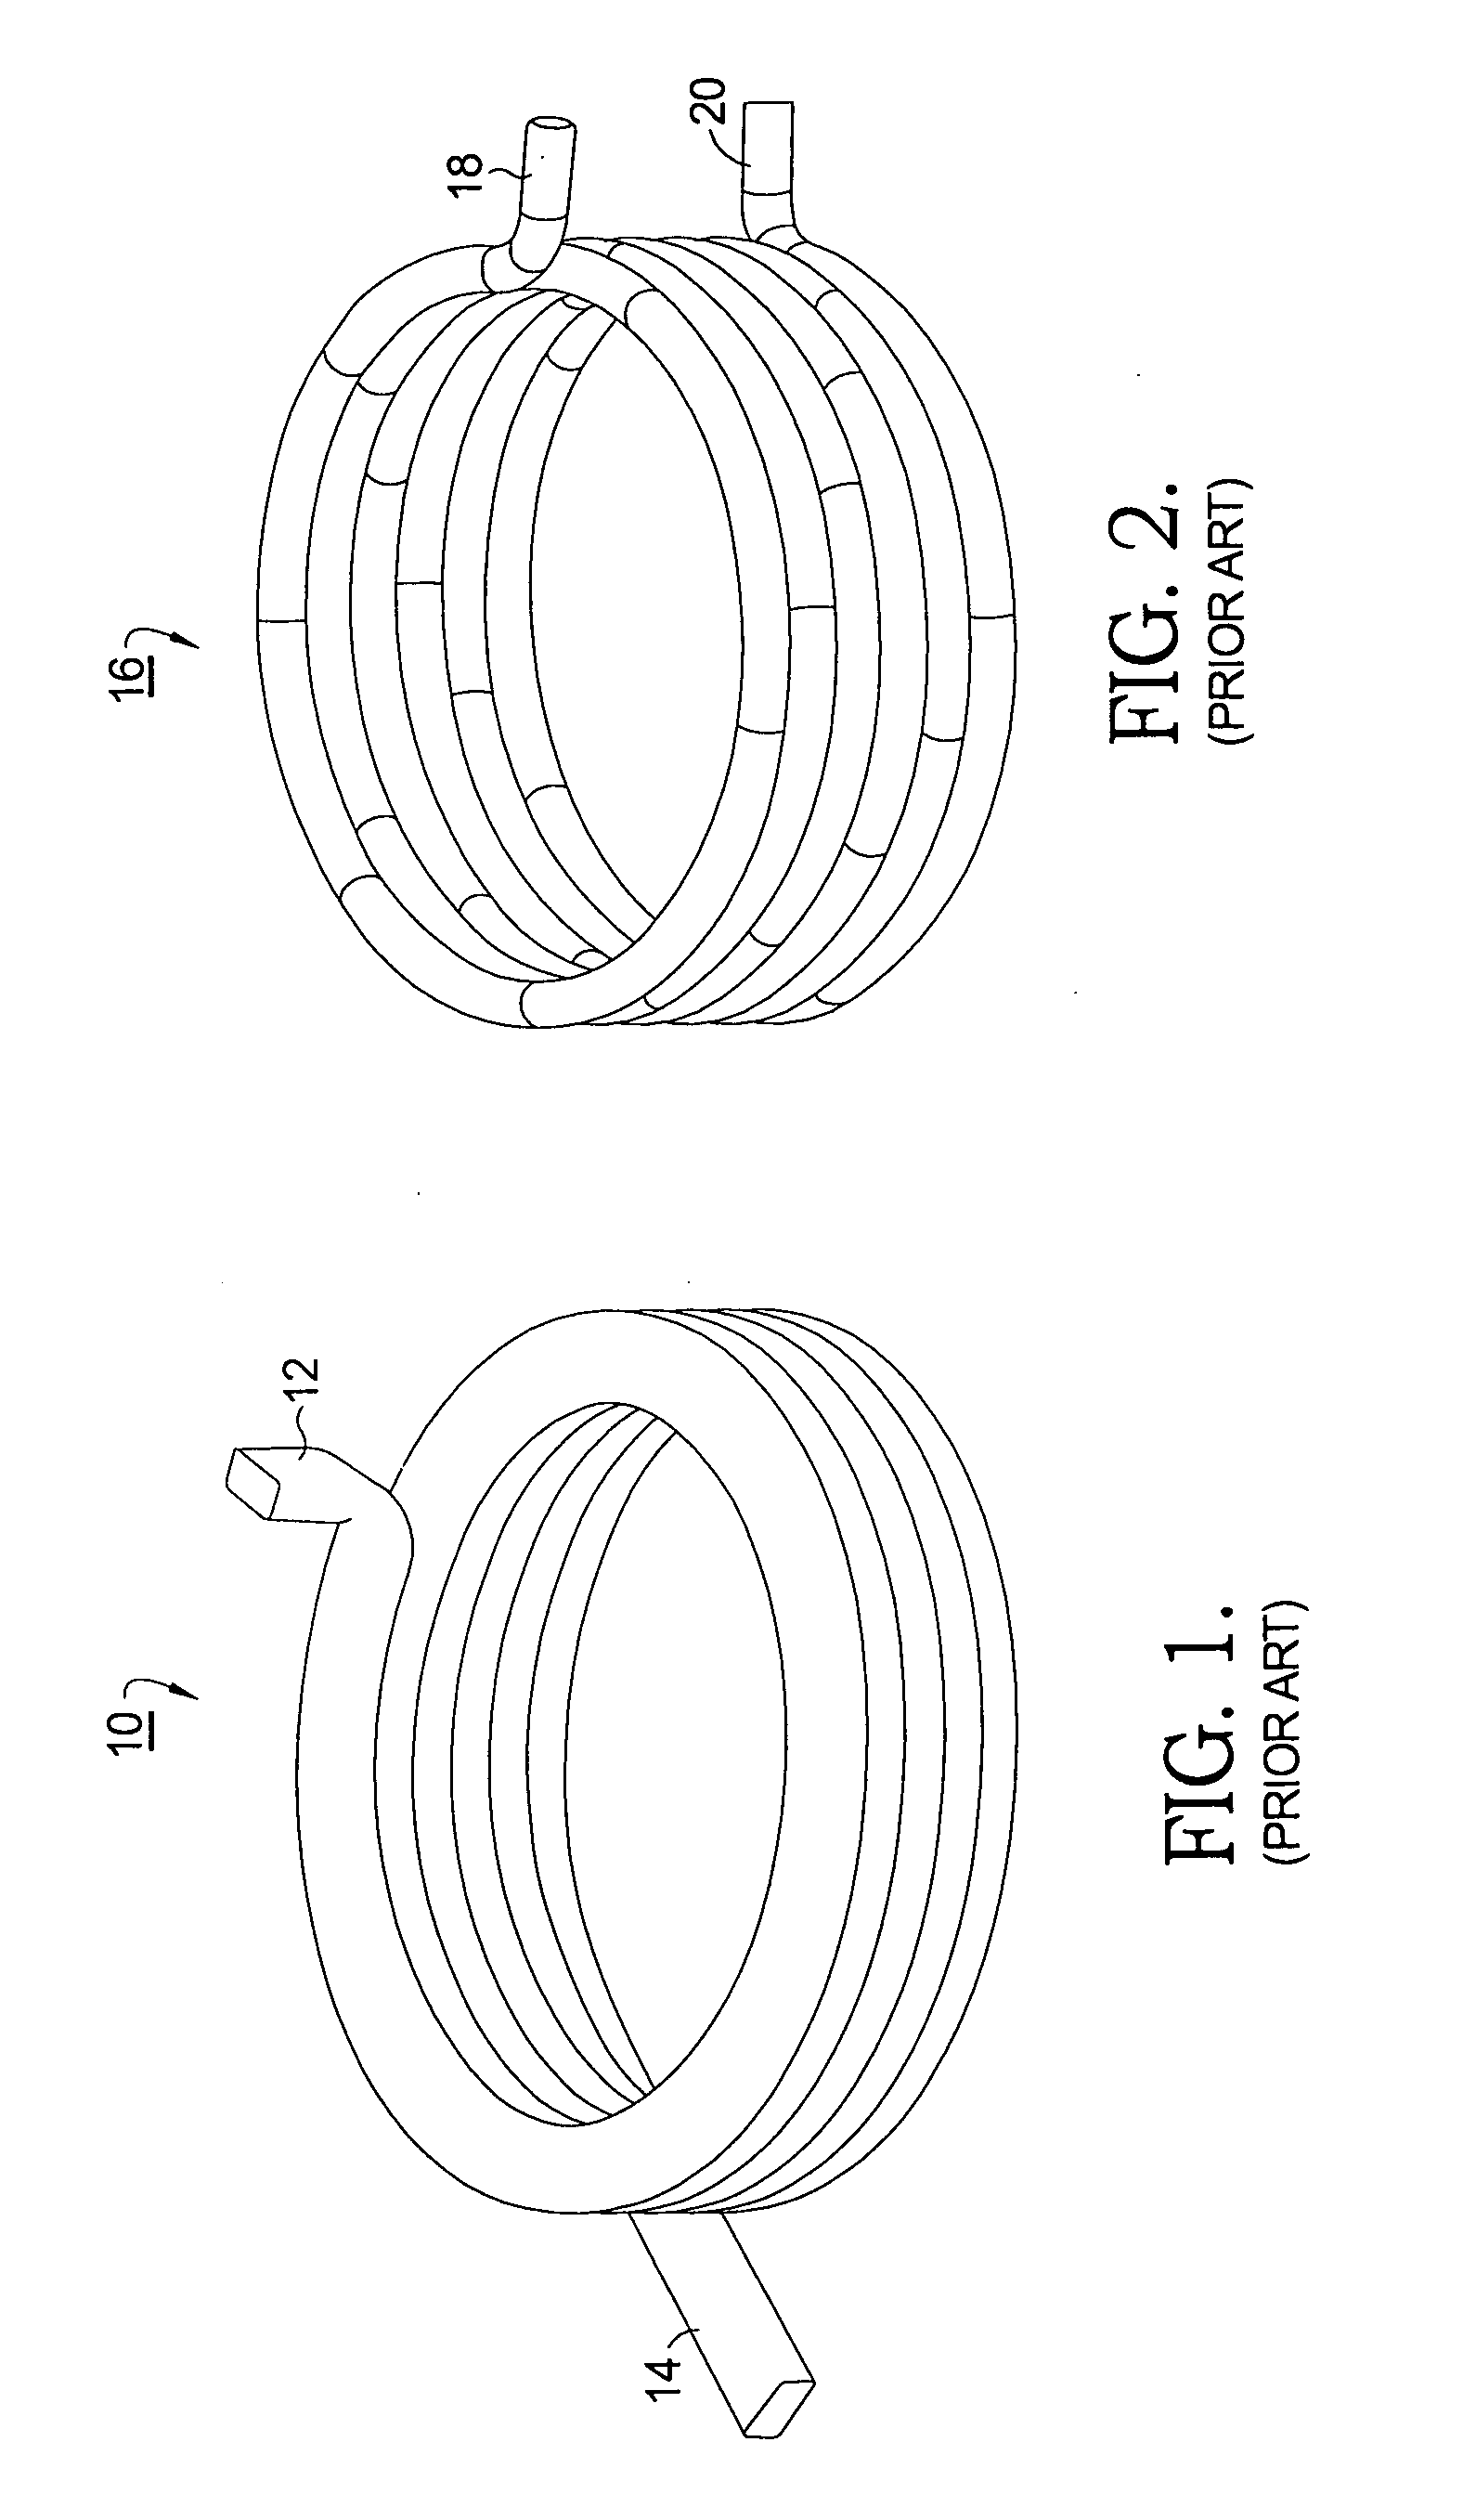 Cam phaser helical bias spring having a square end for retention